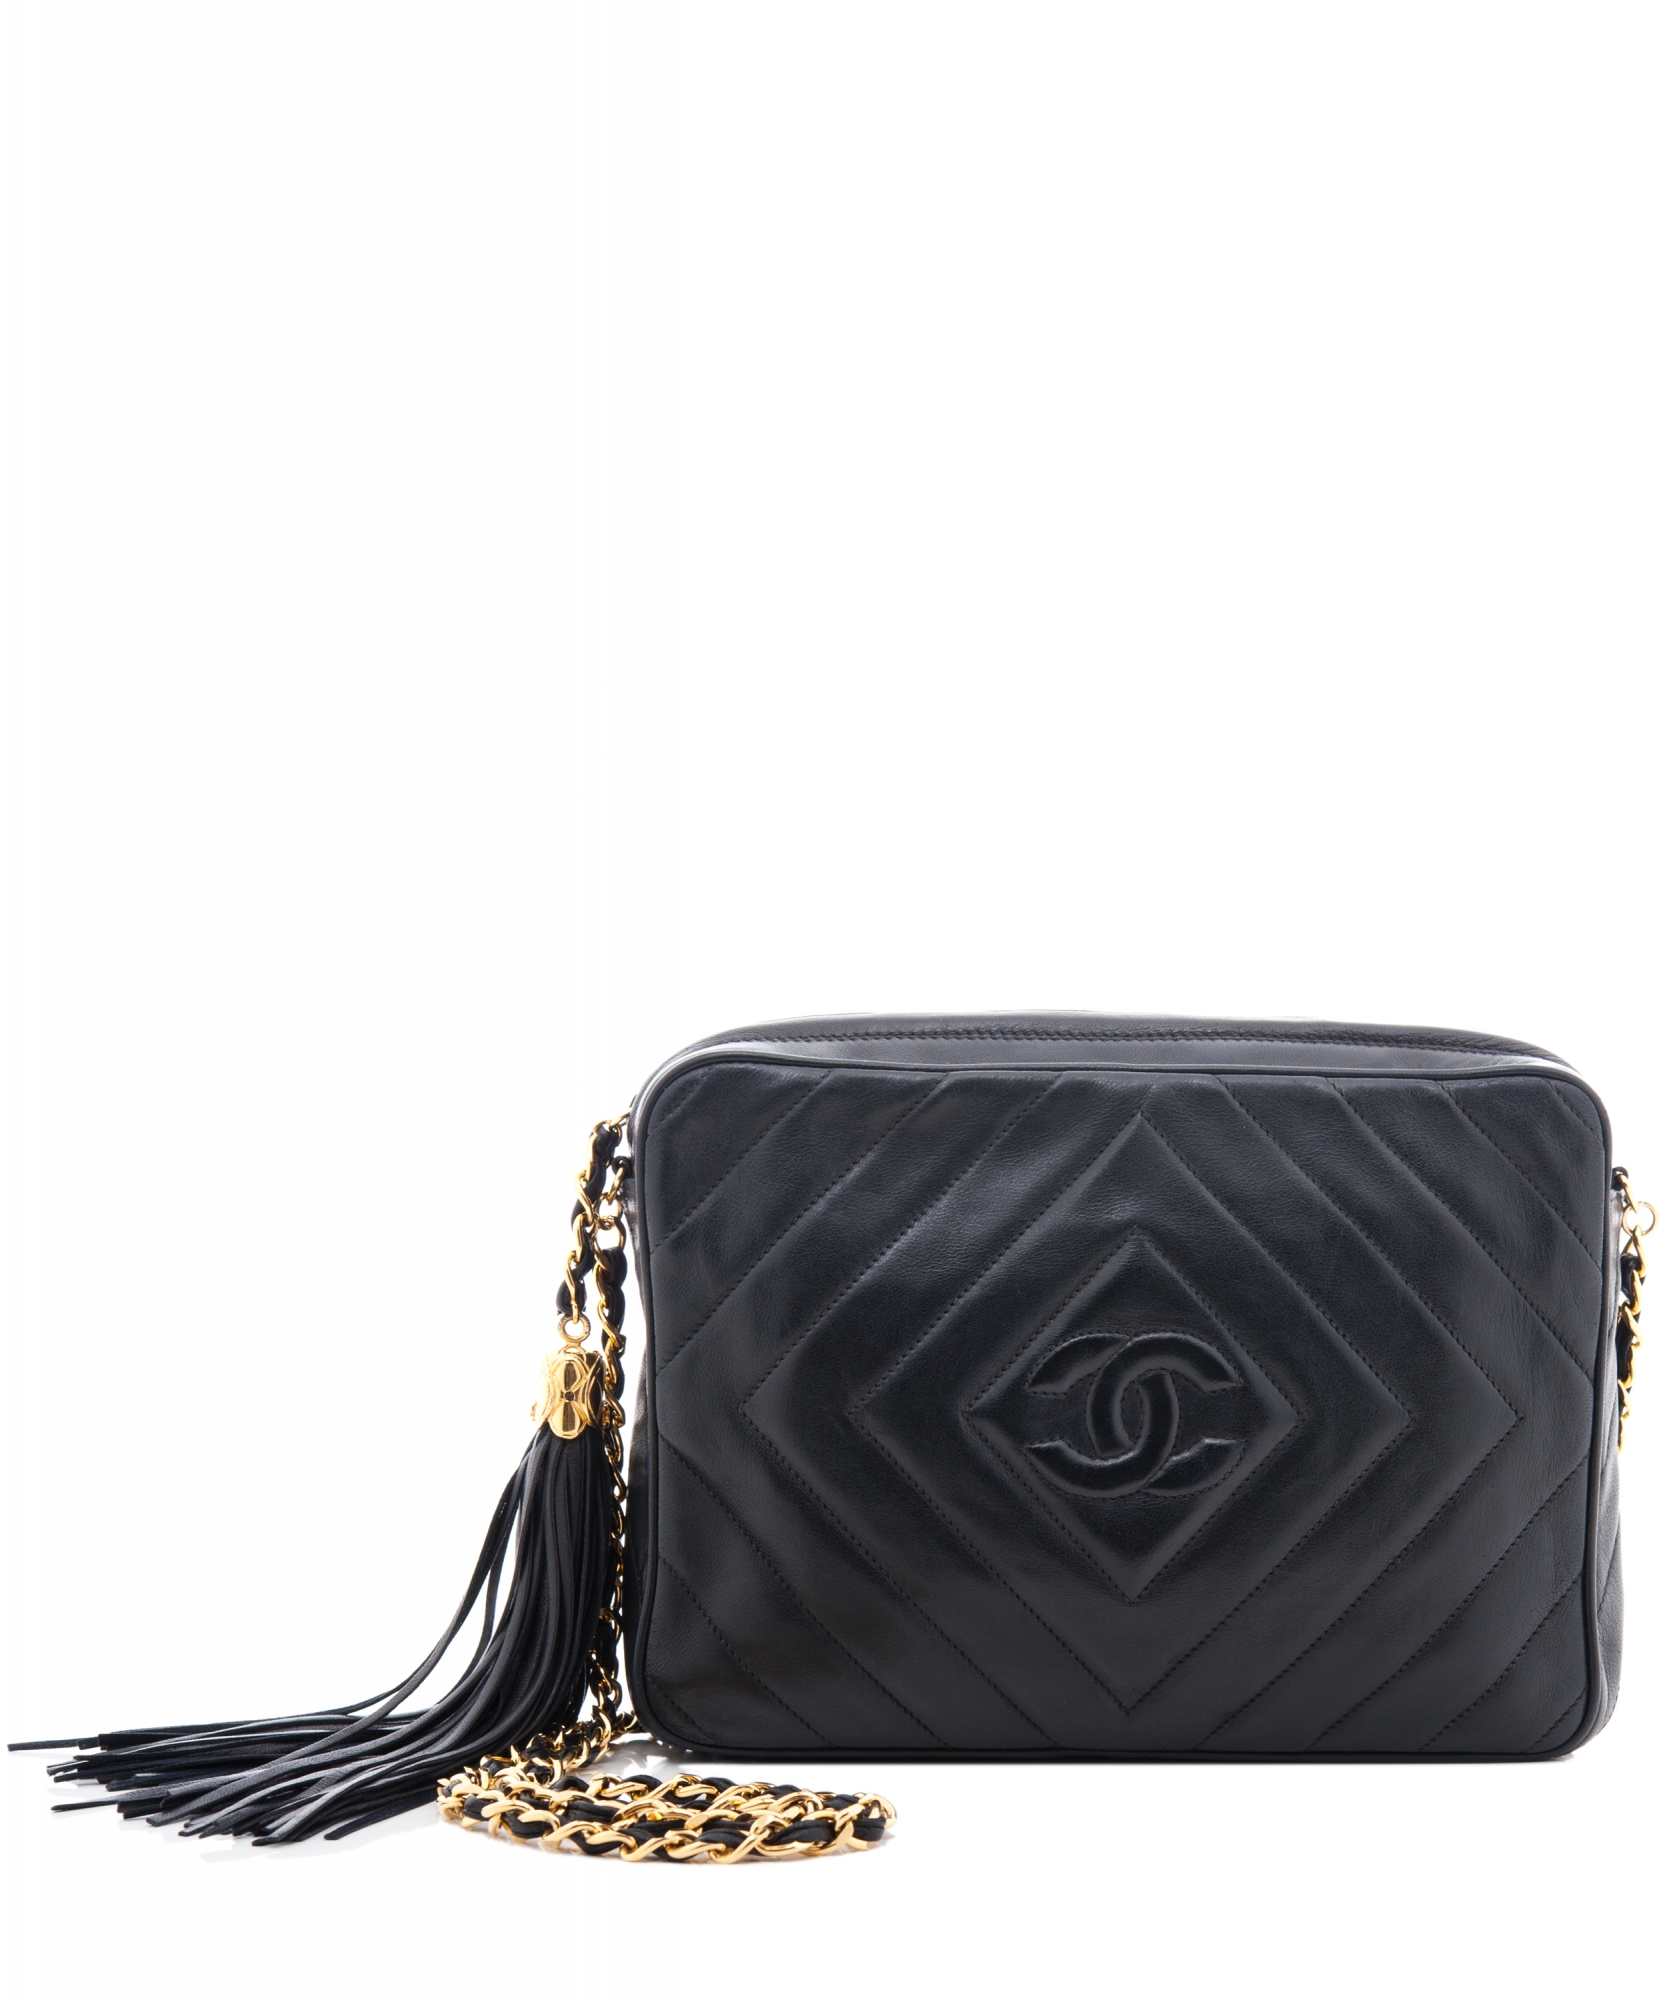 Chanel 'Camera Bag' in Black Chevron Quilted Leather Tassel - Chanel |  ArtListings